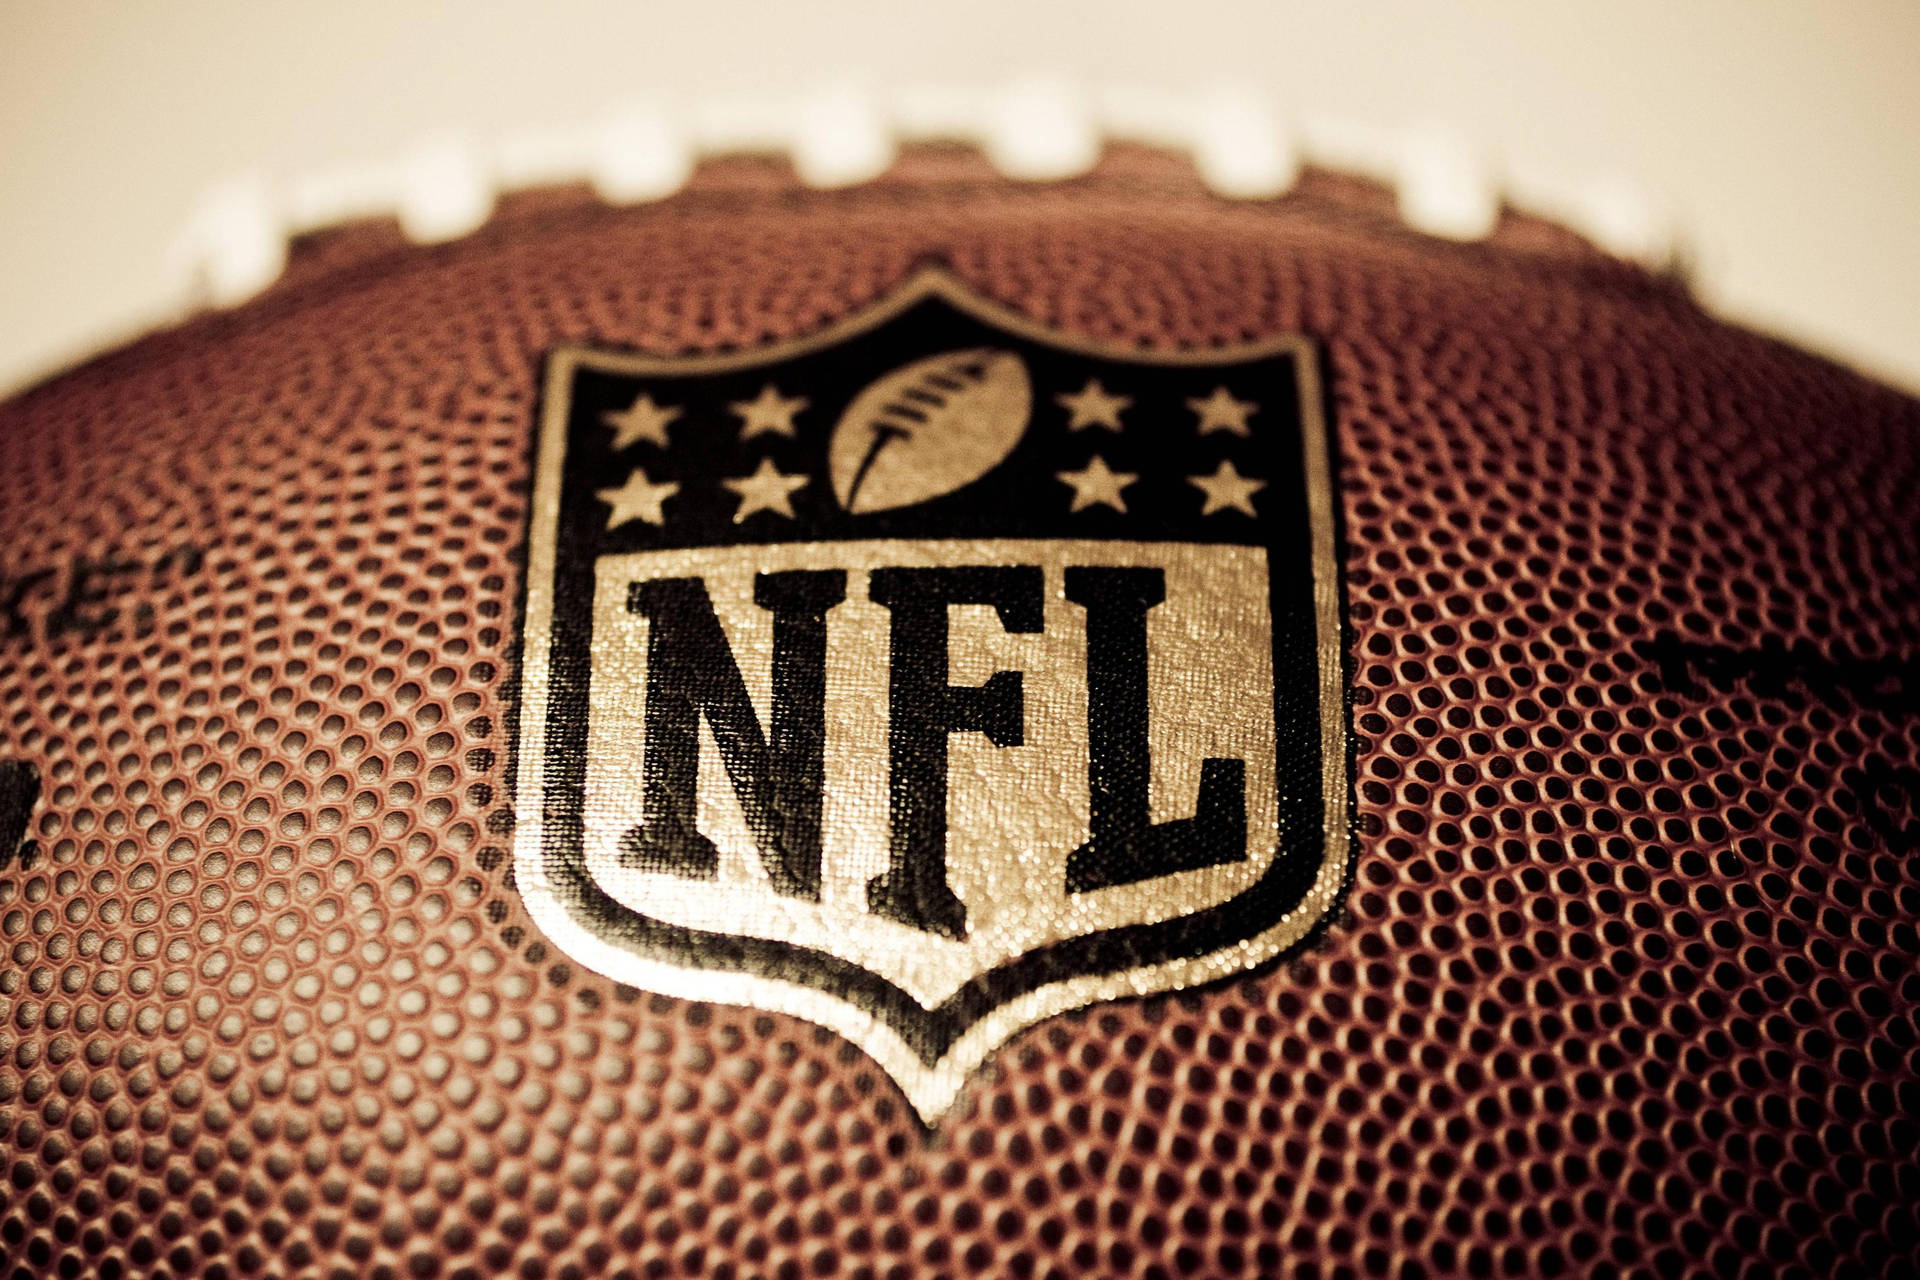 Free Nfl Football Wallpaper Downloads, [600+] Nfl Football Wallpapers for  FREE 